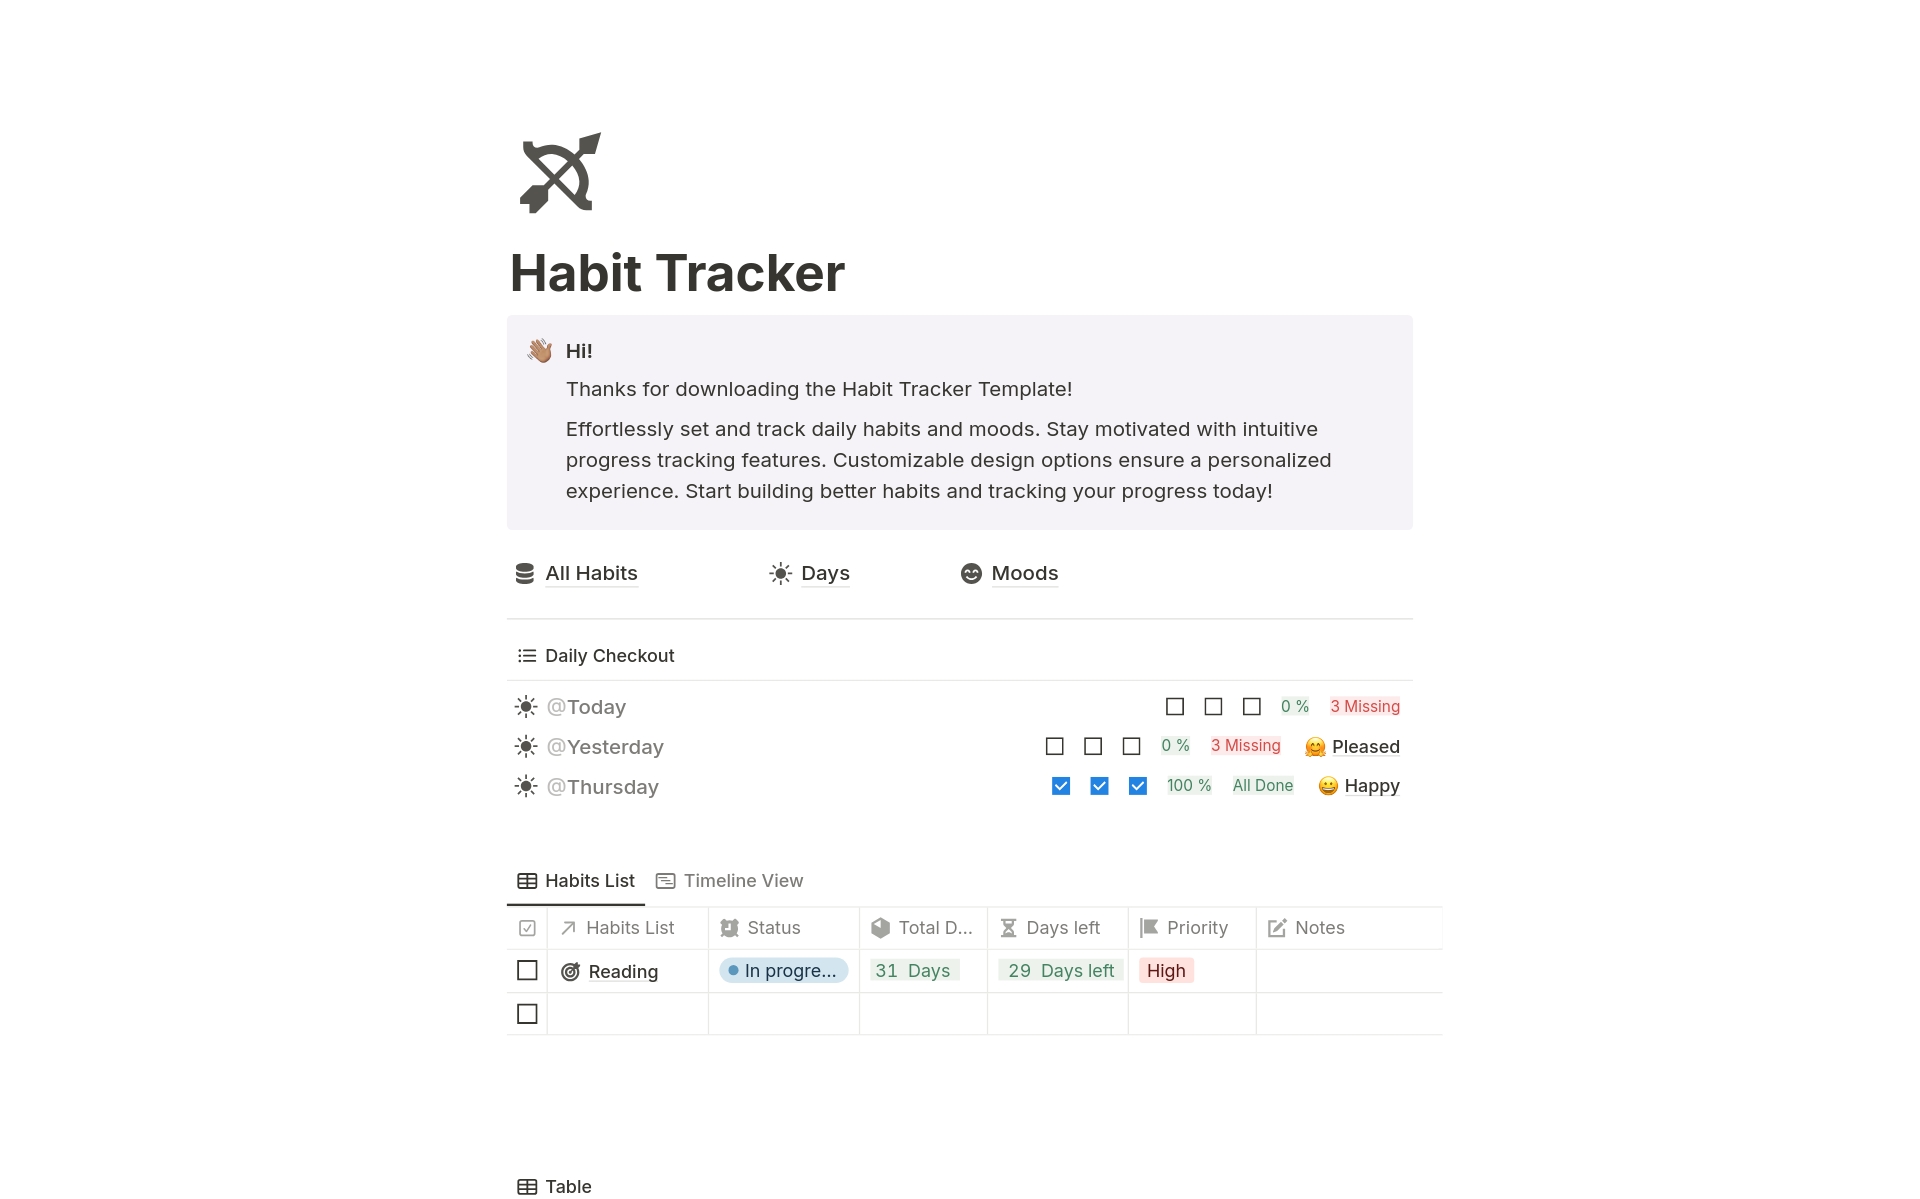 Elevate your daily routines and emotional well-being with our comprehensive Notion habit-tracking template. Effortlessly monitor your habits and mood, set personalized goals, and track your progress toward a happier, healthier you.